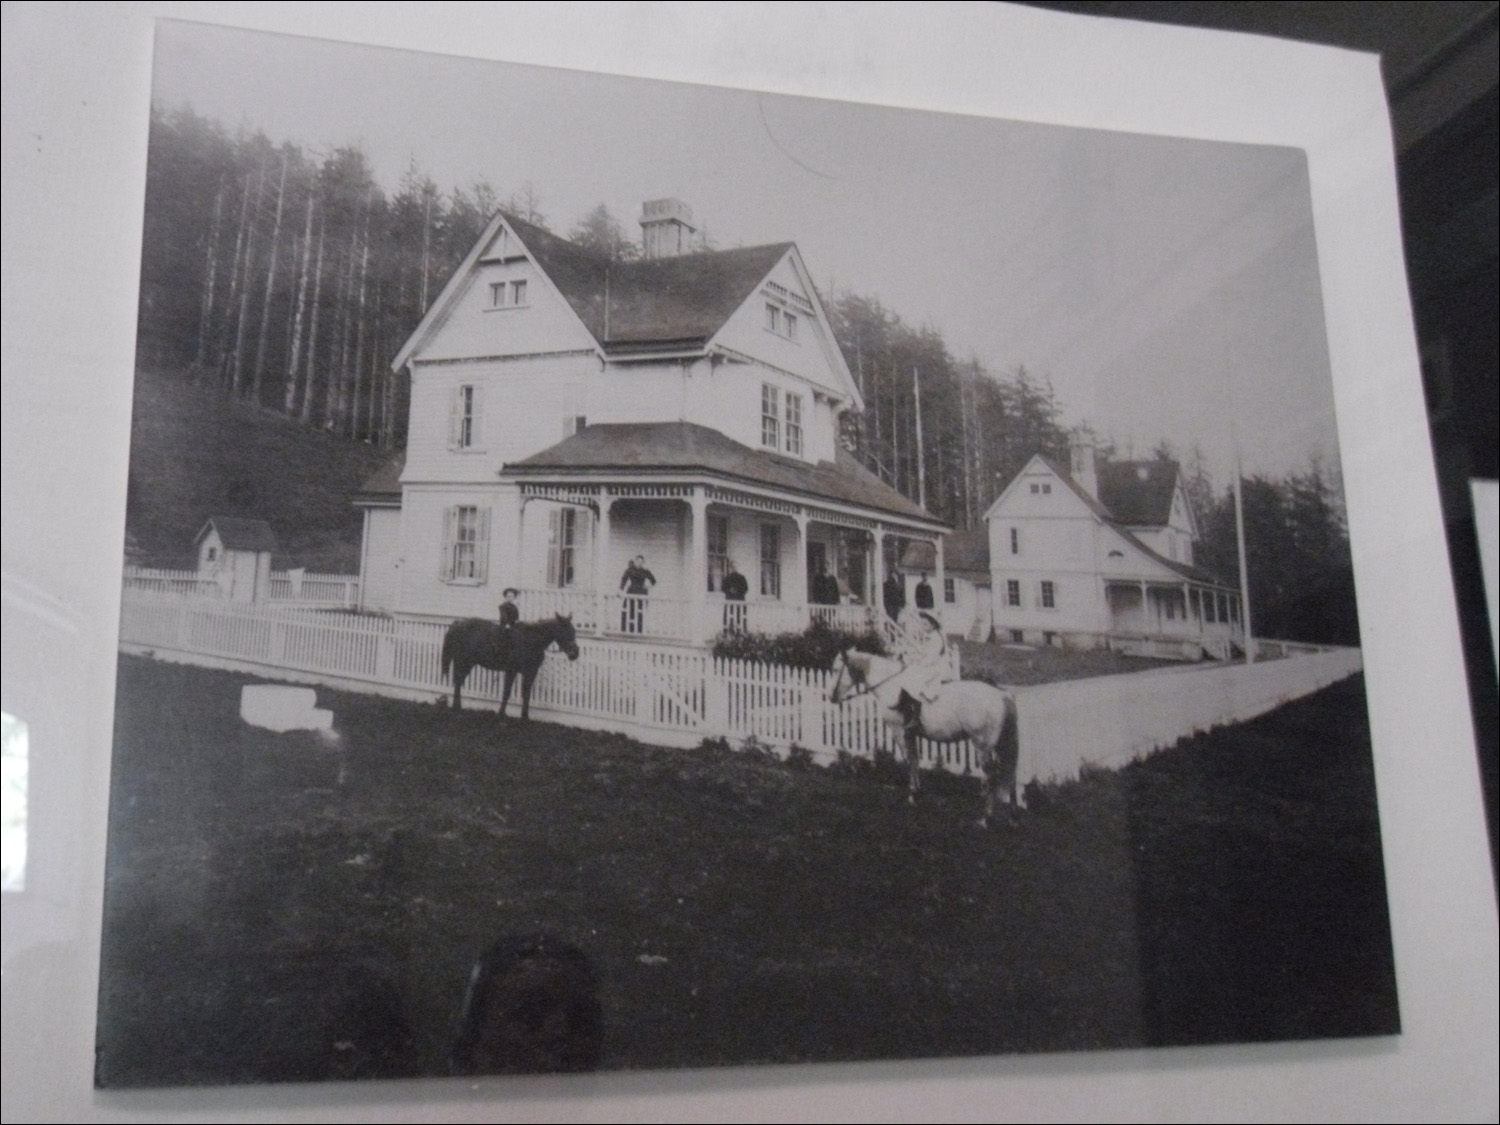 Yachats, OR- Photos taken at Heceta Lighthouse-picture of original 2 keeper houses, farthest still remains as B&B